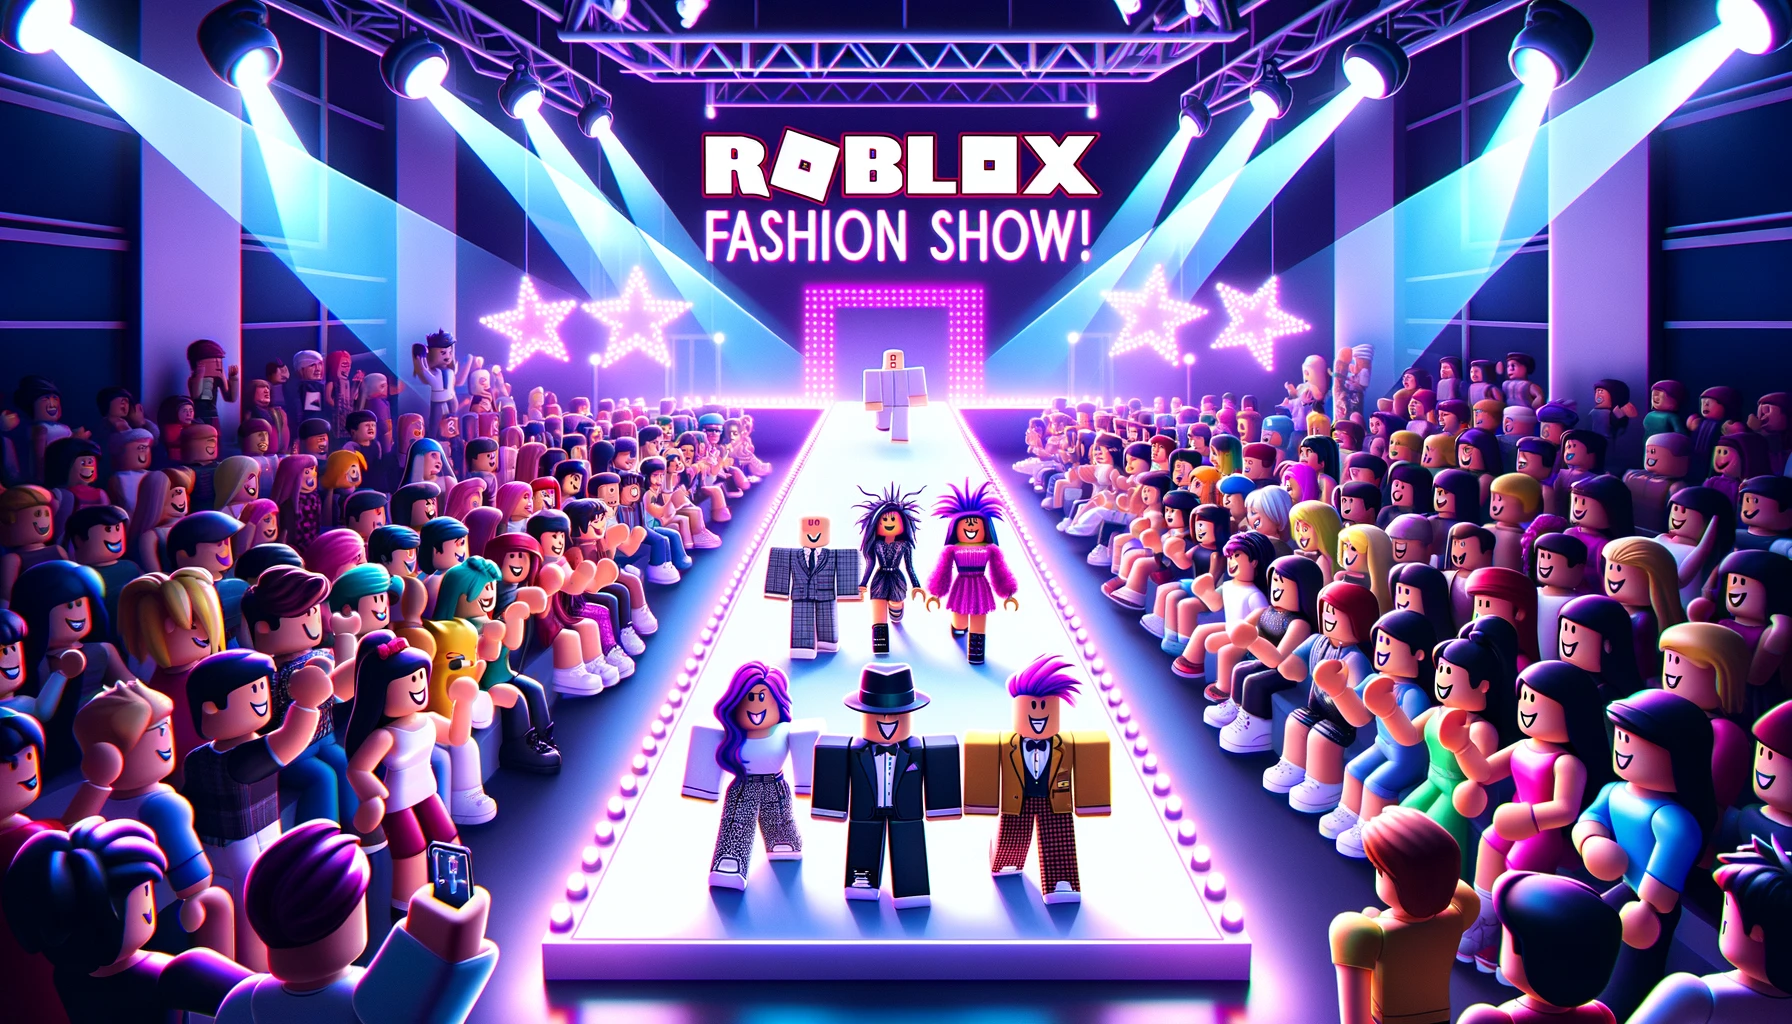 Illustration of a digital fashion runway with Roblox avatars strutting their stylish outfits. The runway is illuminated with neon lights, and the audience consists of more Roblox characters cheering and taking photos. A banner above the runway declares 'Roblox Fashion Show!' with spotlights shining.